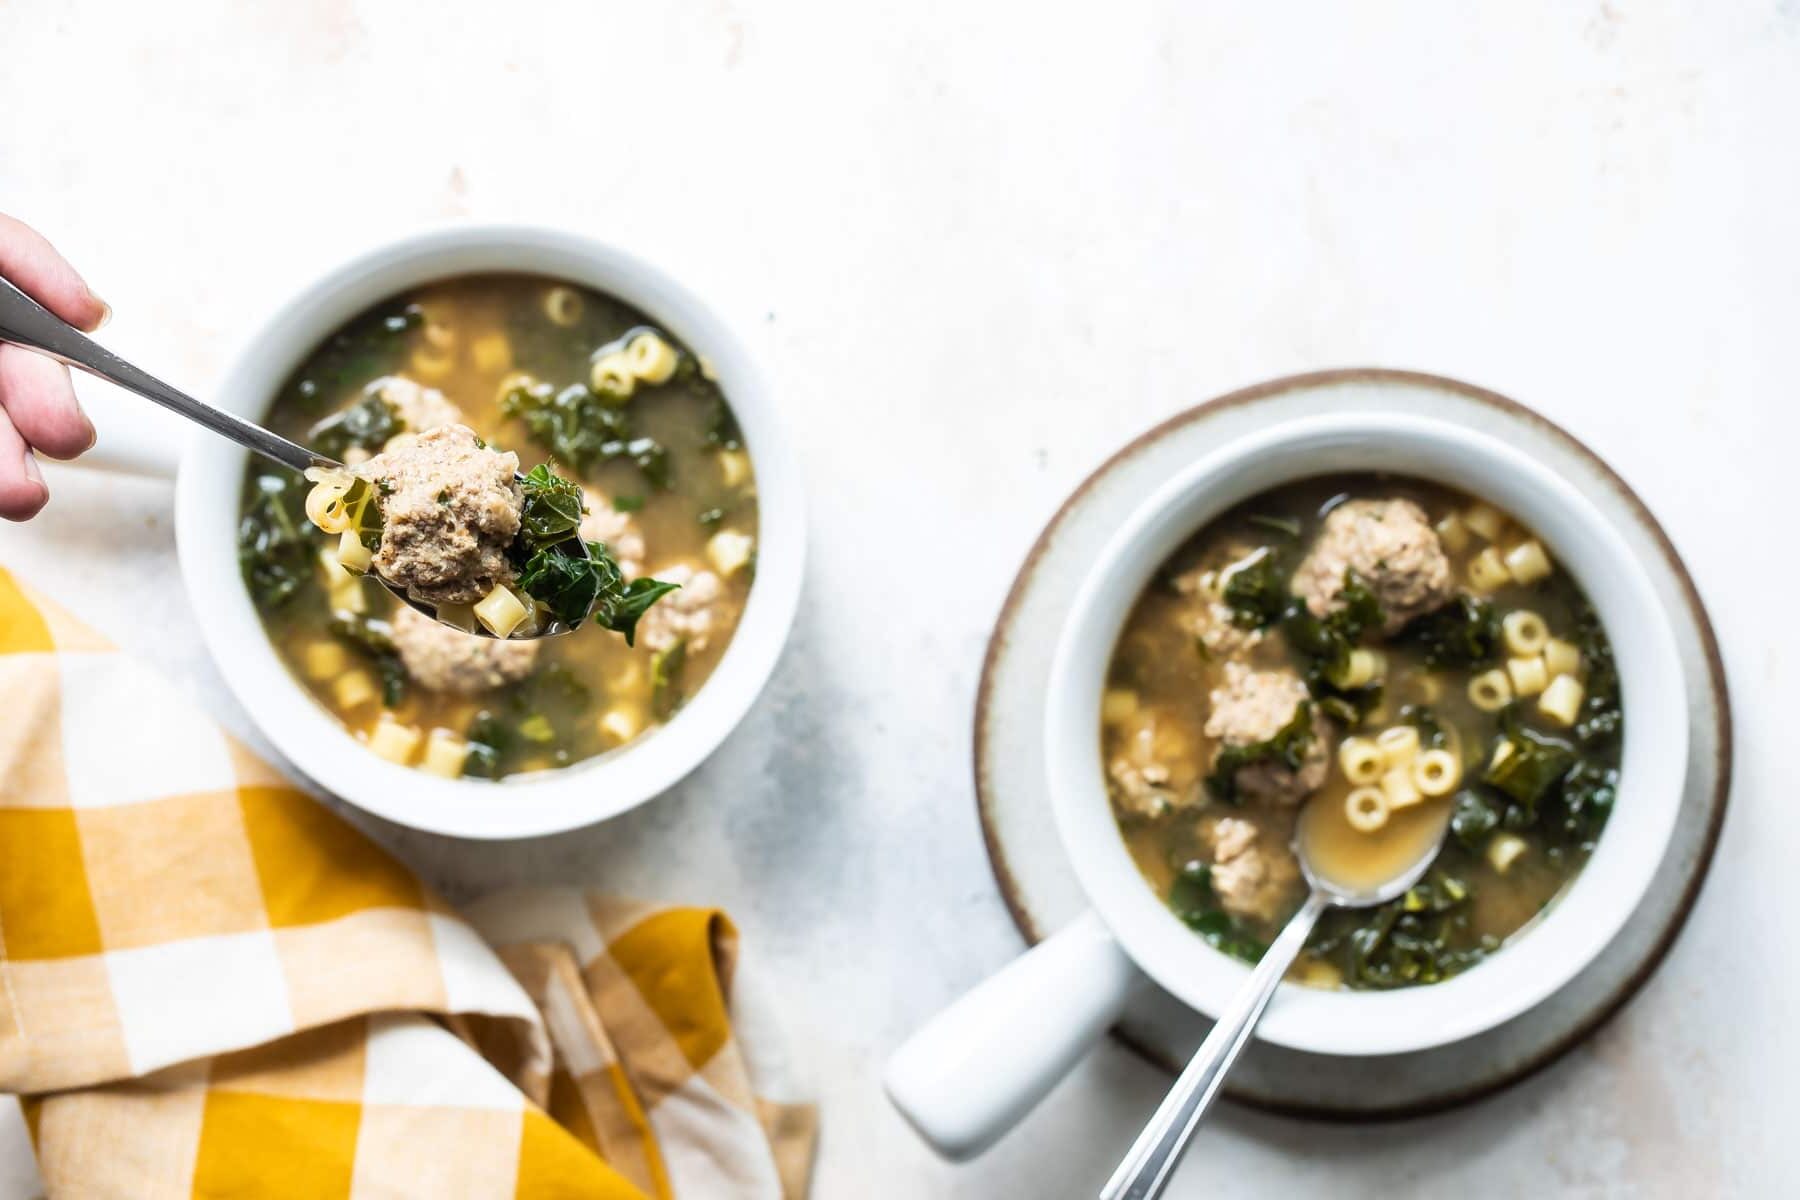 Italian wedding soup being spooned out of a white bowl.